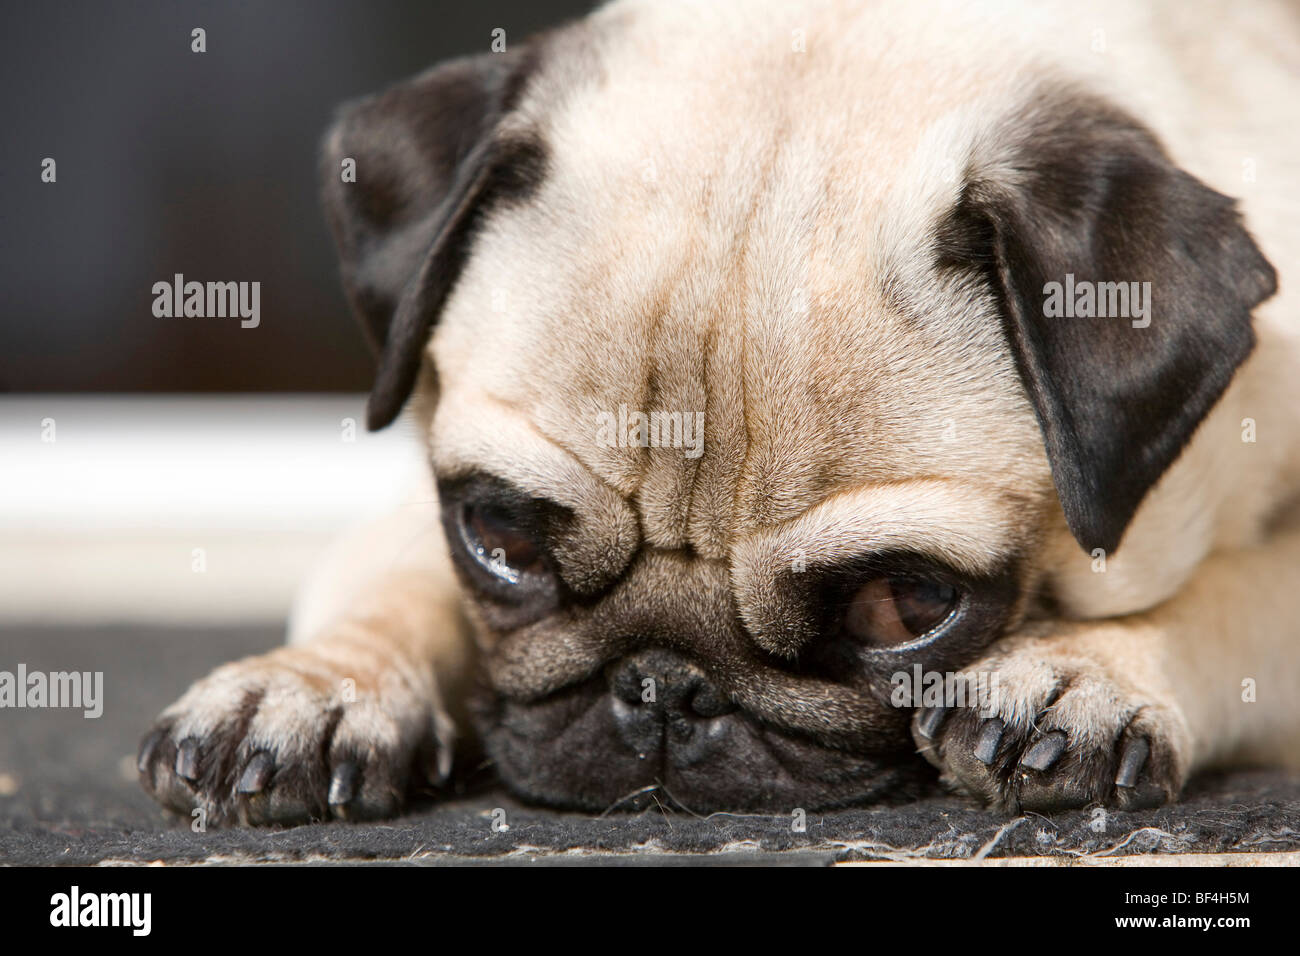 Lying Pug, direct view, close-up Stock Photo